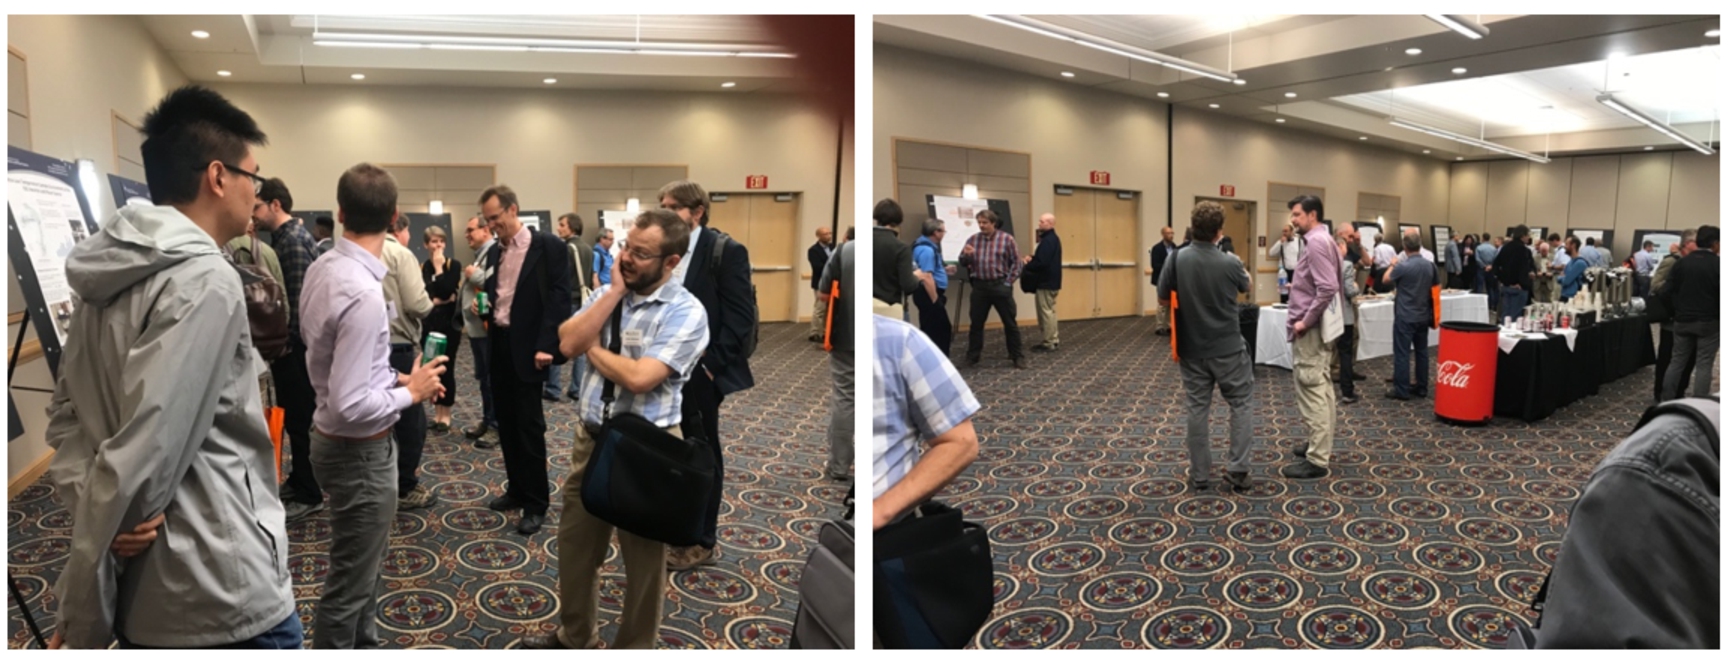 Participants enjoying informal discussions at one of the poster sessions.